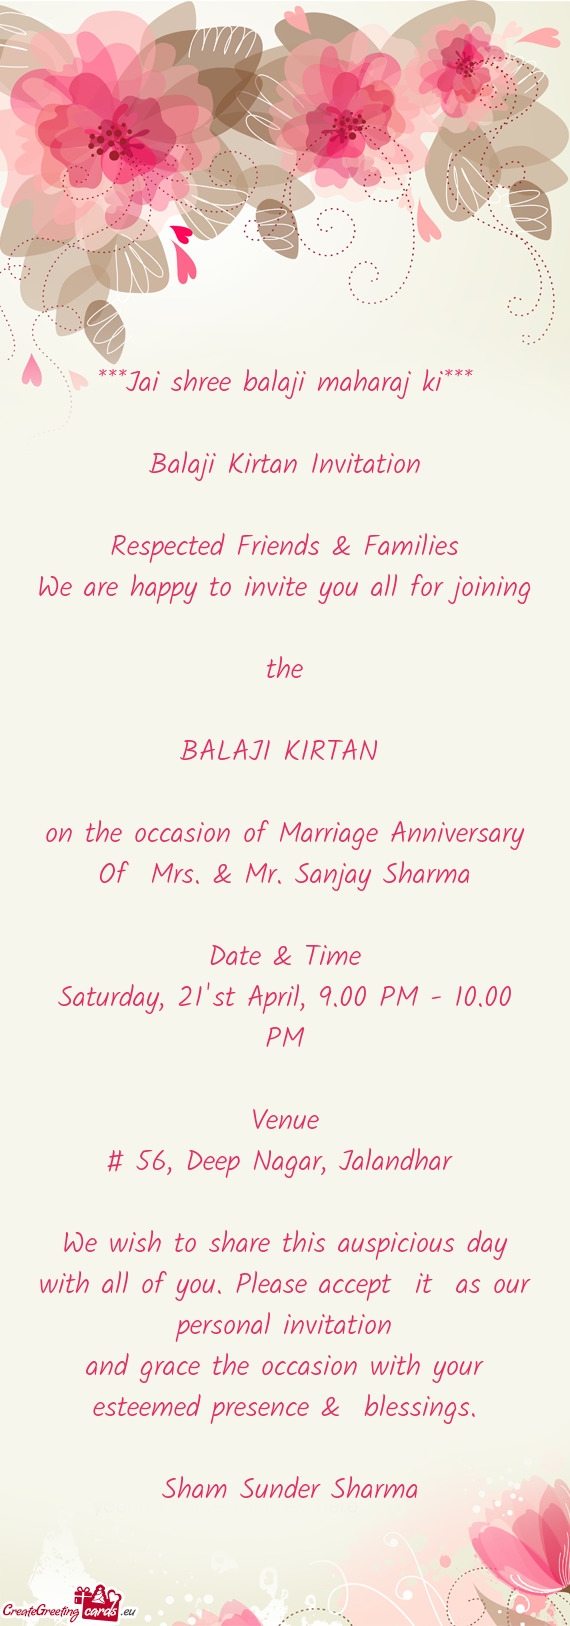 On the occasion of Marriage Anniversary